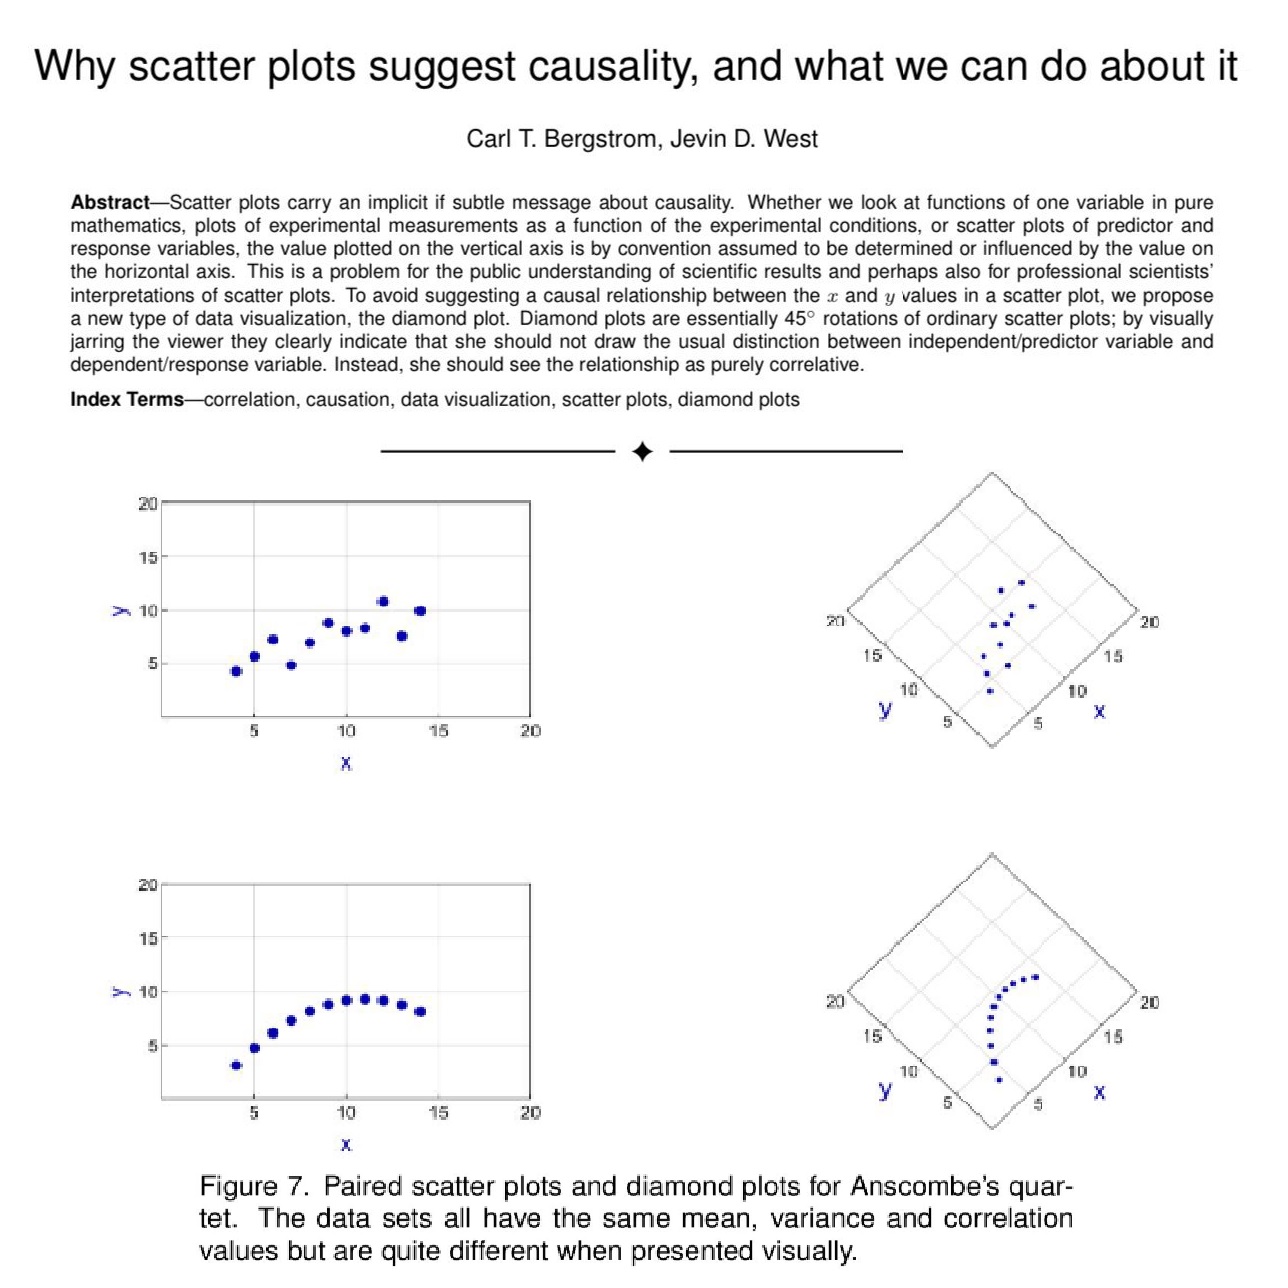 Scatterplots can be misleading, because we often interpret them as implying causality: We should use diamond plots instead